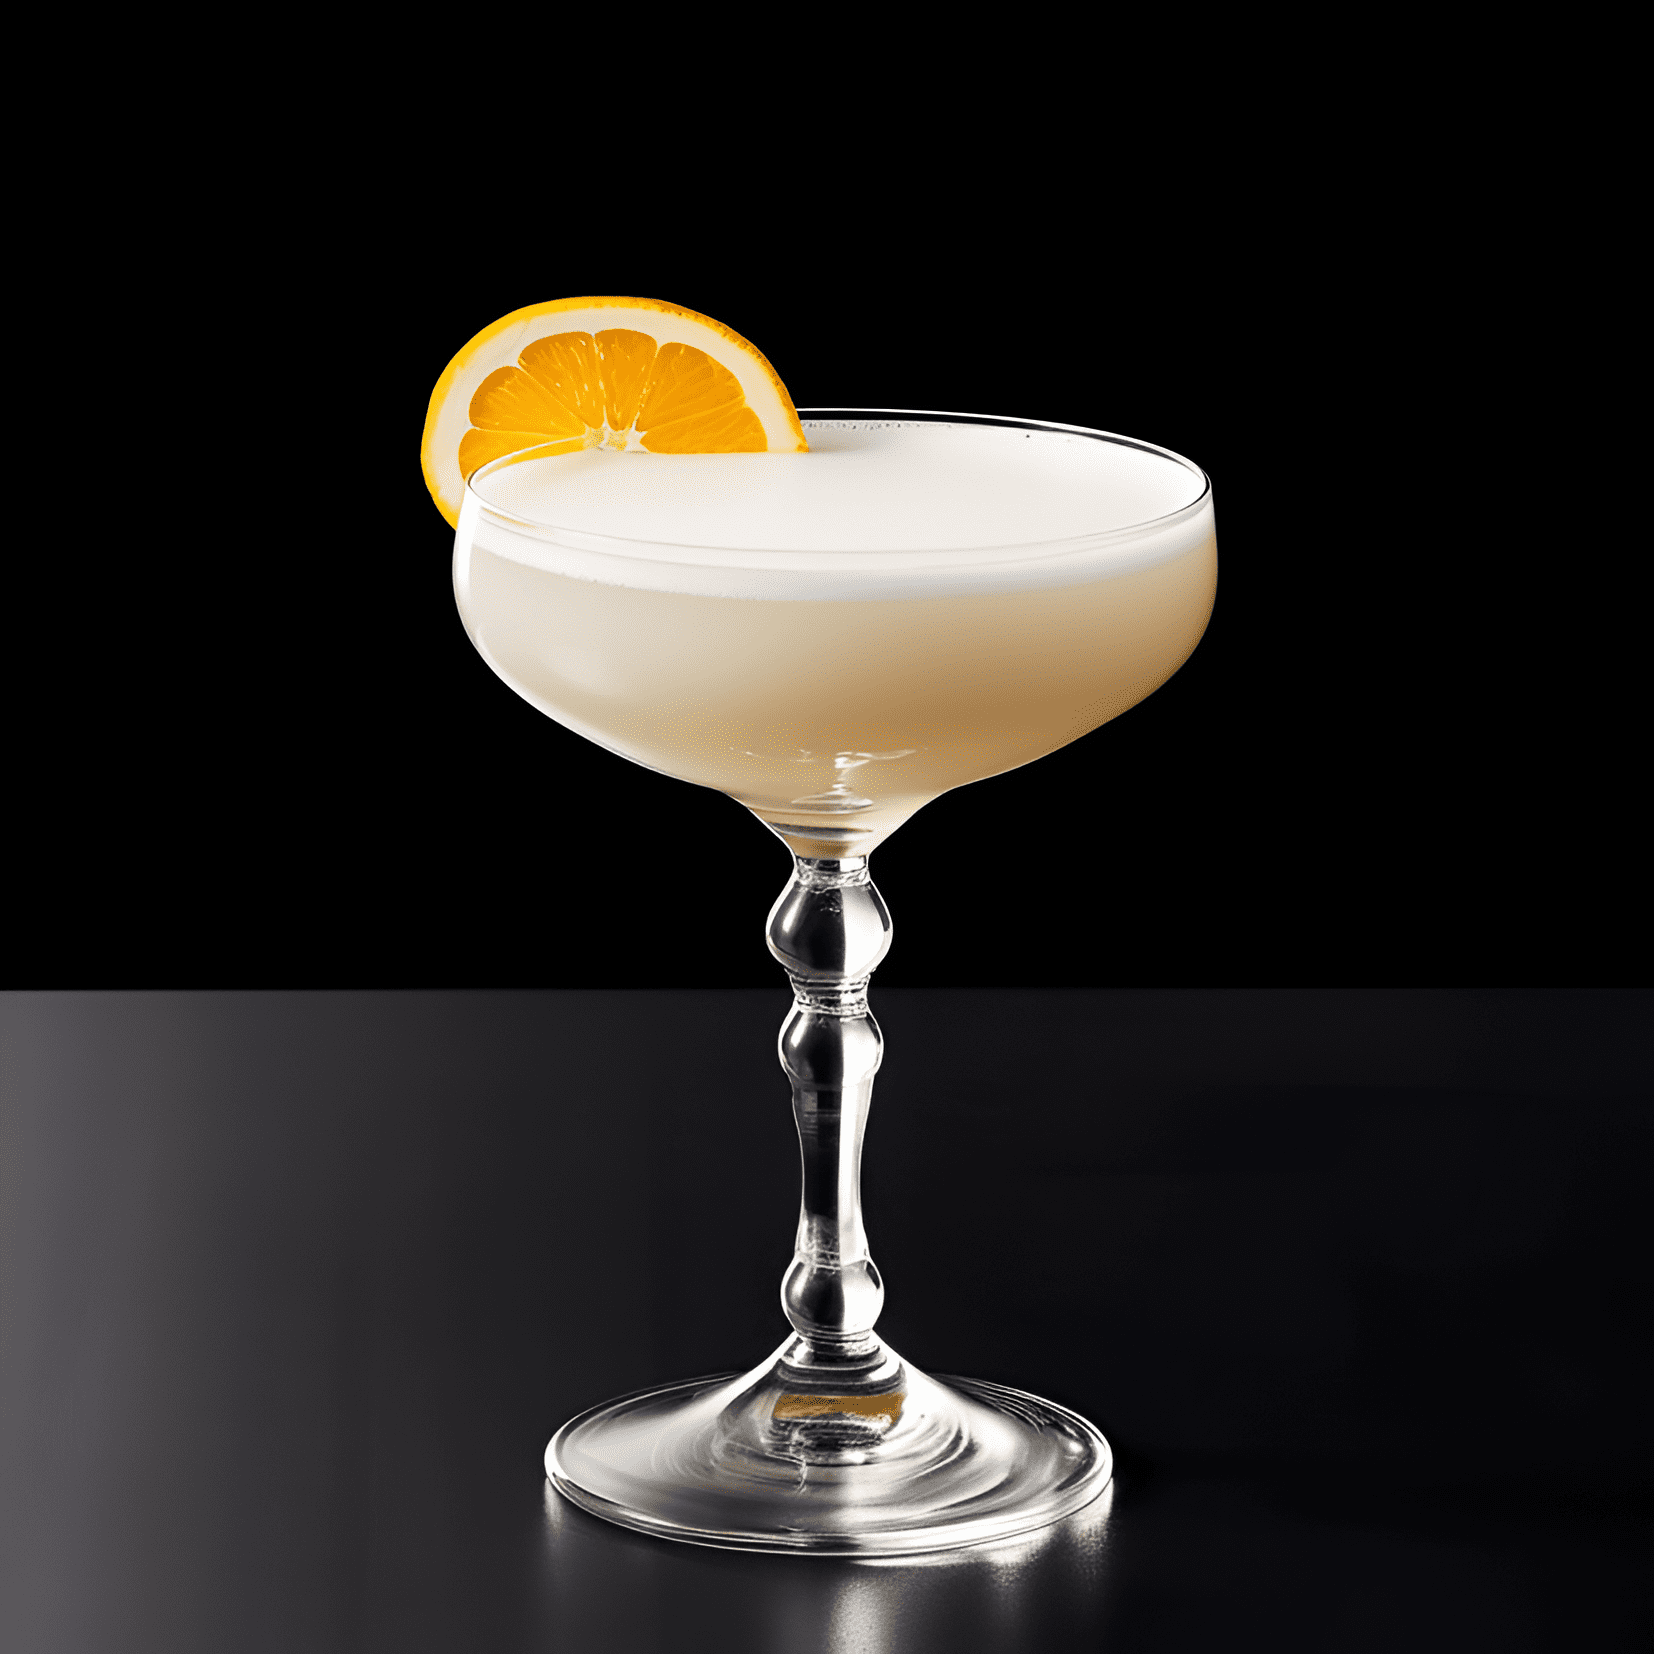 White Lady Cocktail Recipe - The White Lady has a delicate balance of sweet and sour flavors, with a hint of citrus from the lemon juice. The gin provides a strong, herbal backbone, while the orange liqueur adds a touch of sweetness and complexity. The egg white gives the cocktail a smooth, velvety texture that is both light and refreshing.